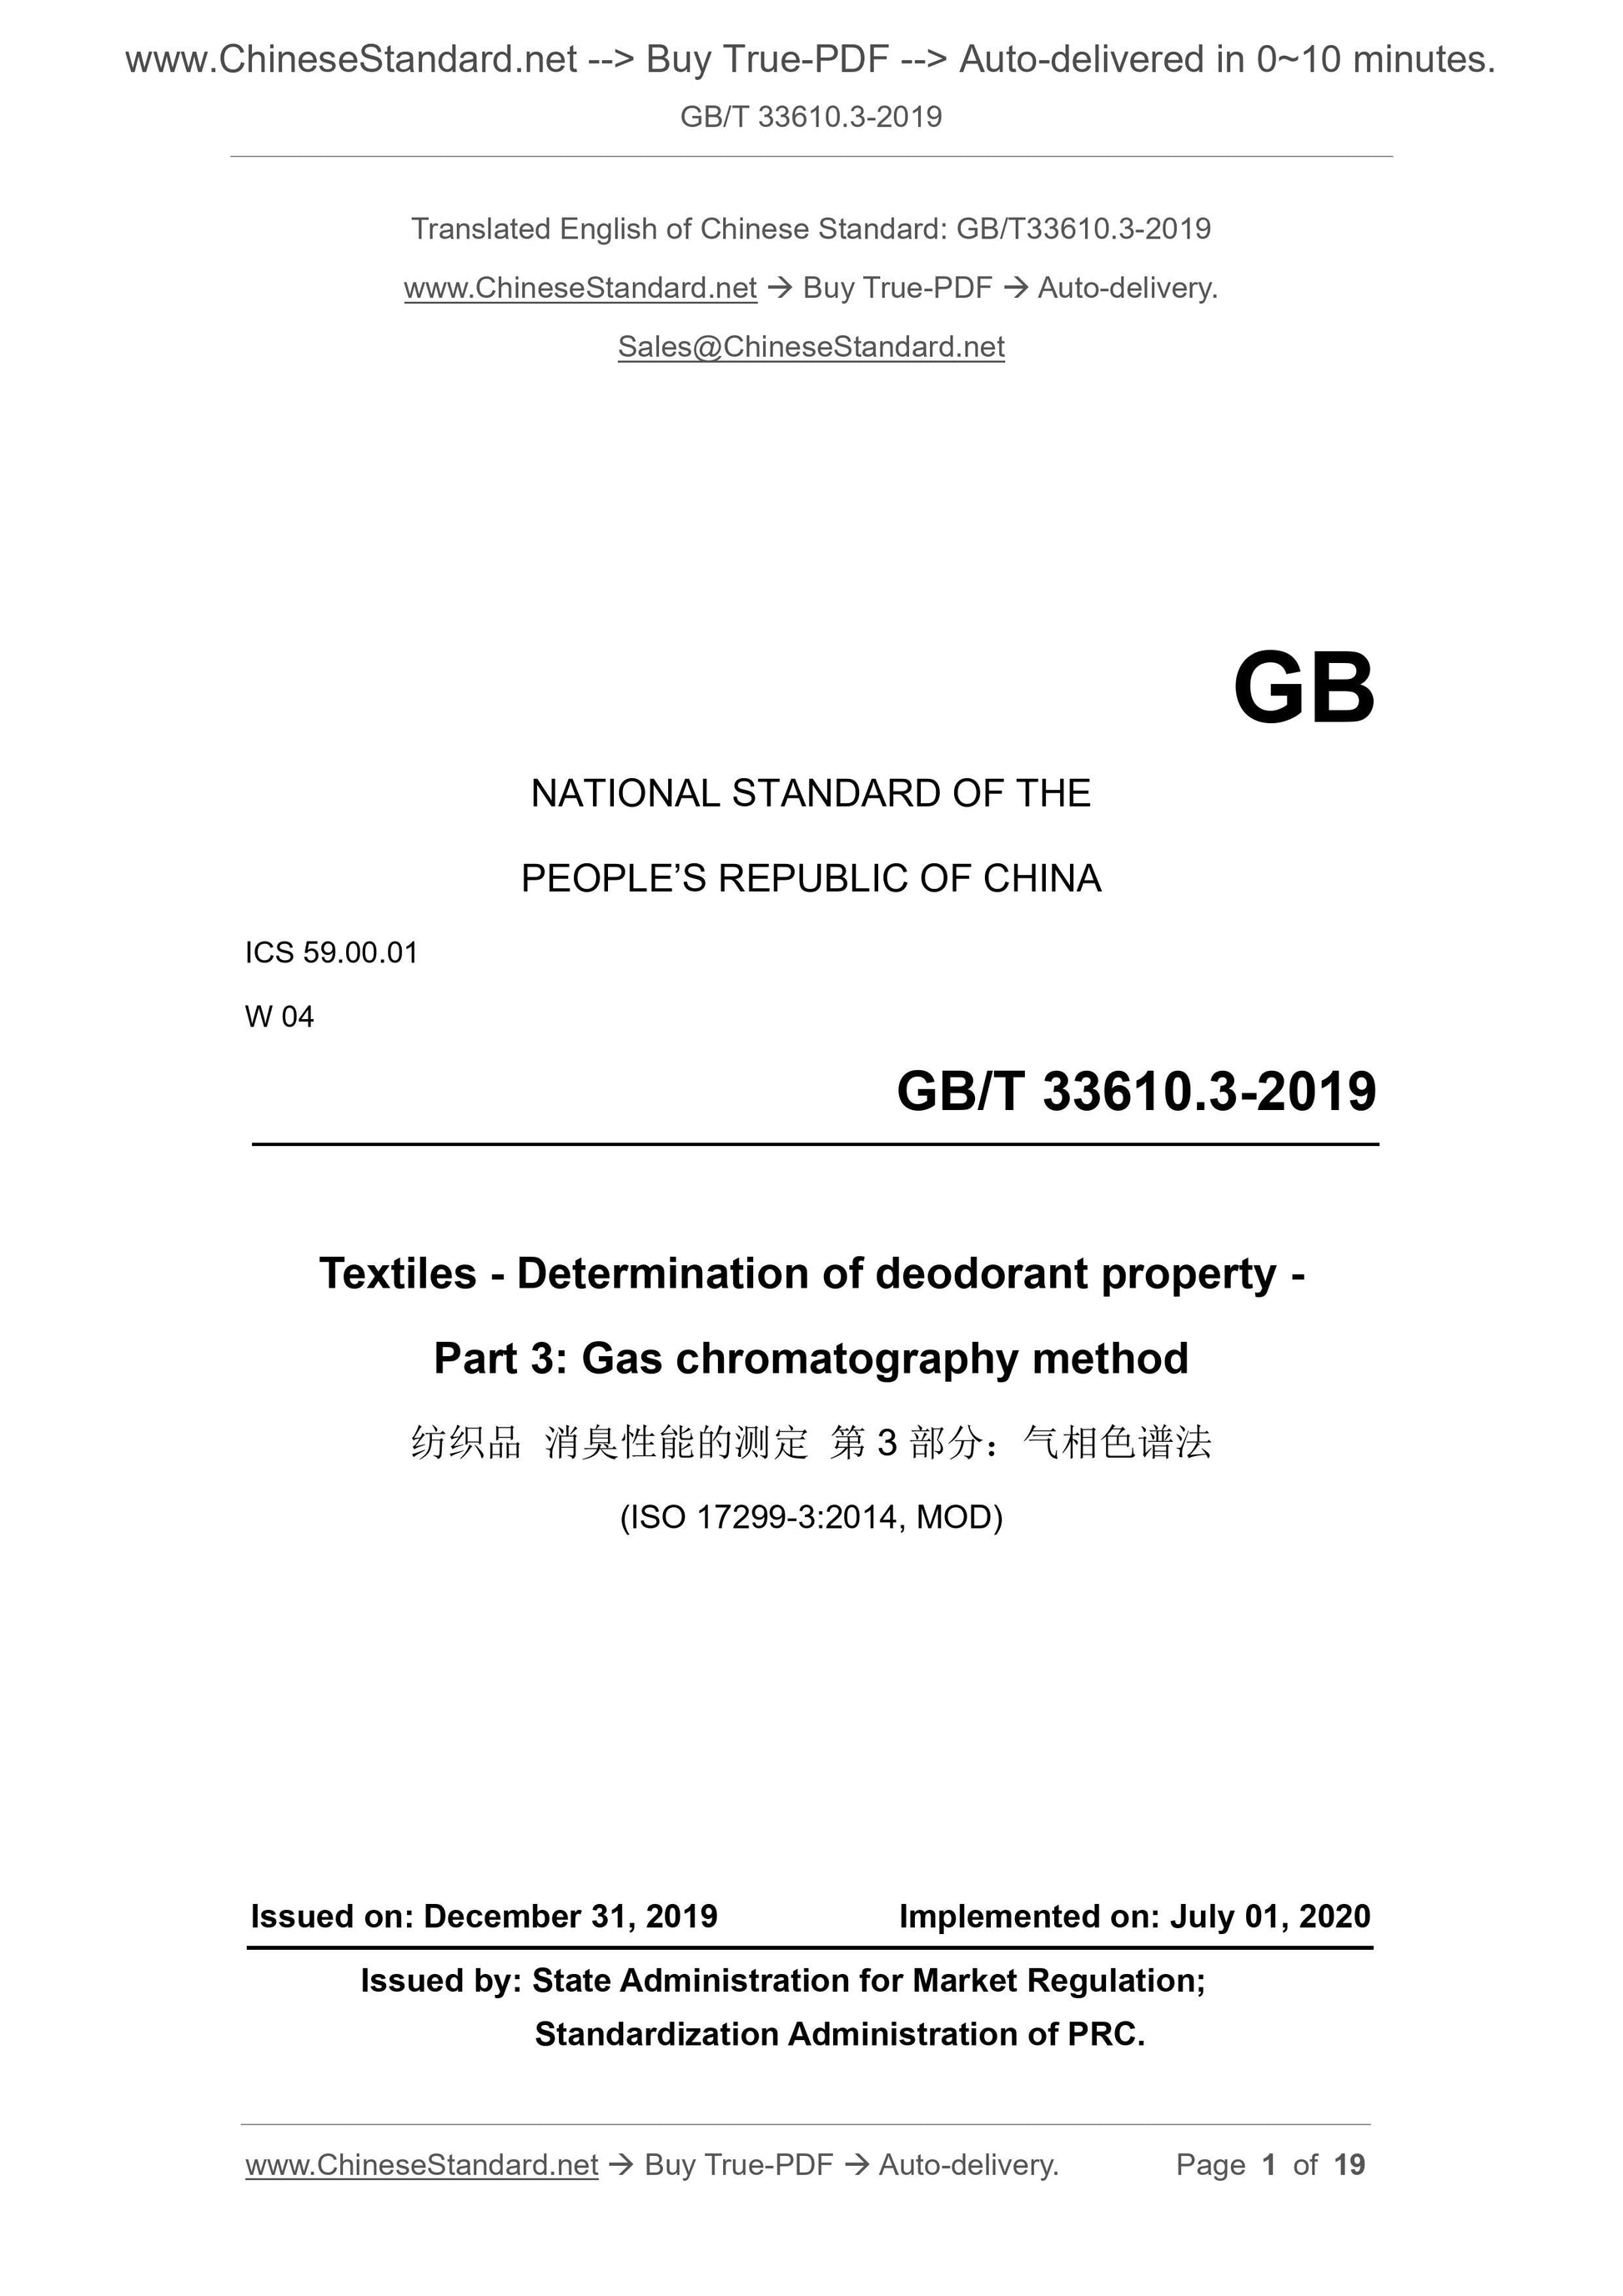 GB/T 33610.3-2019 Page 1